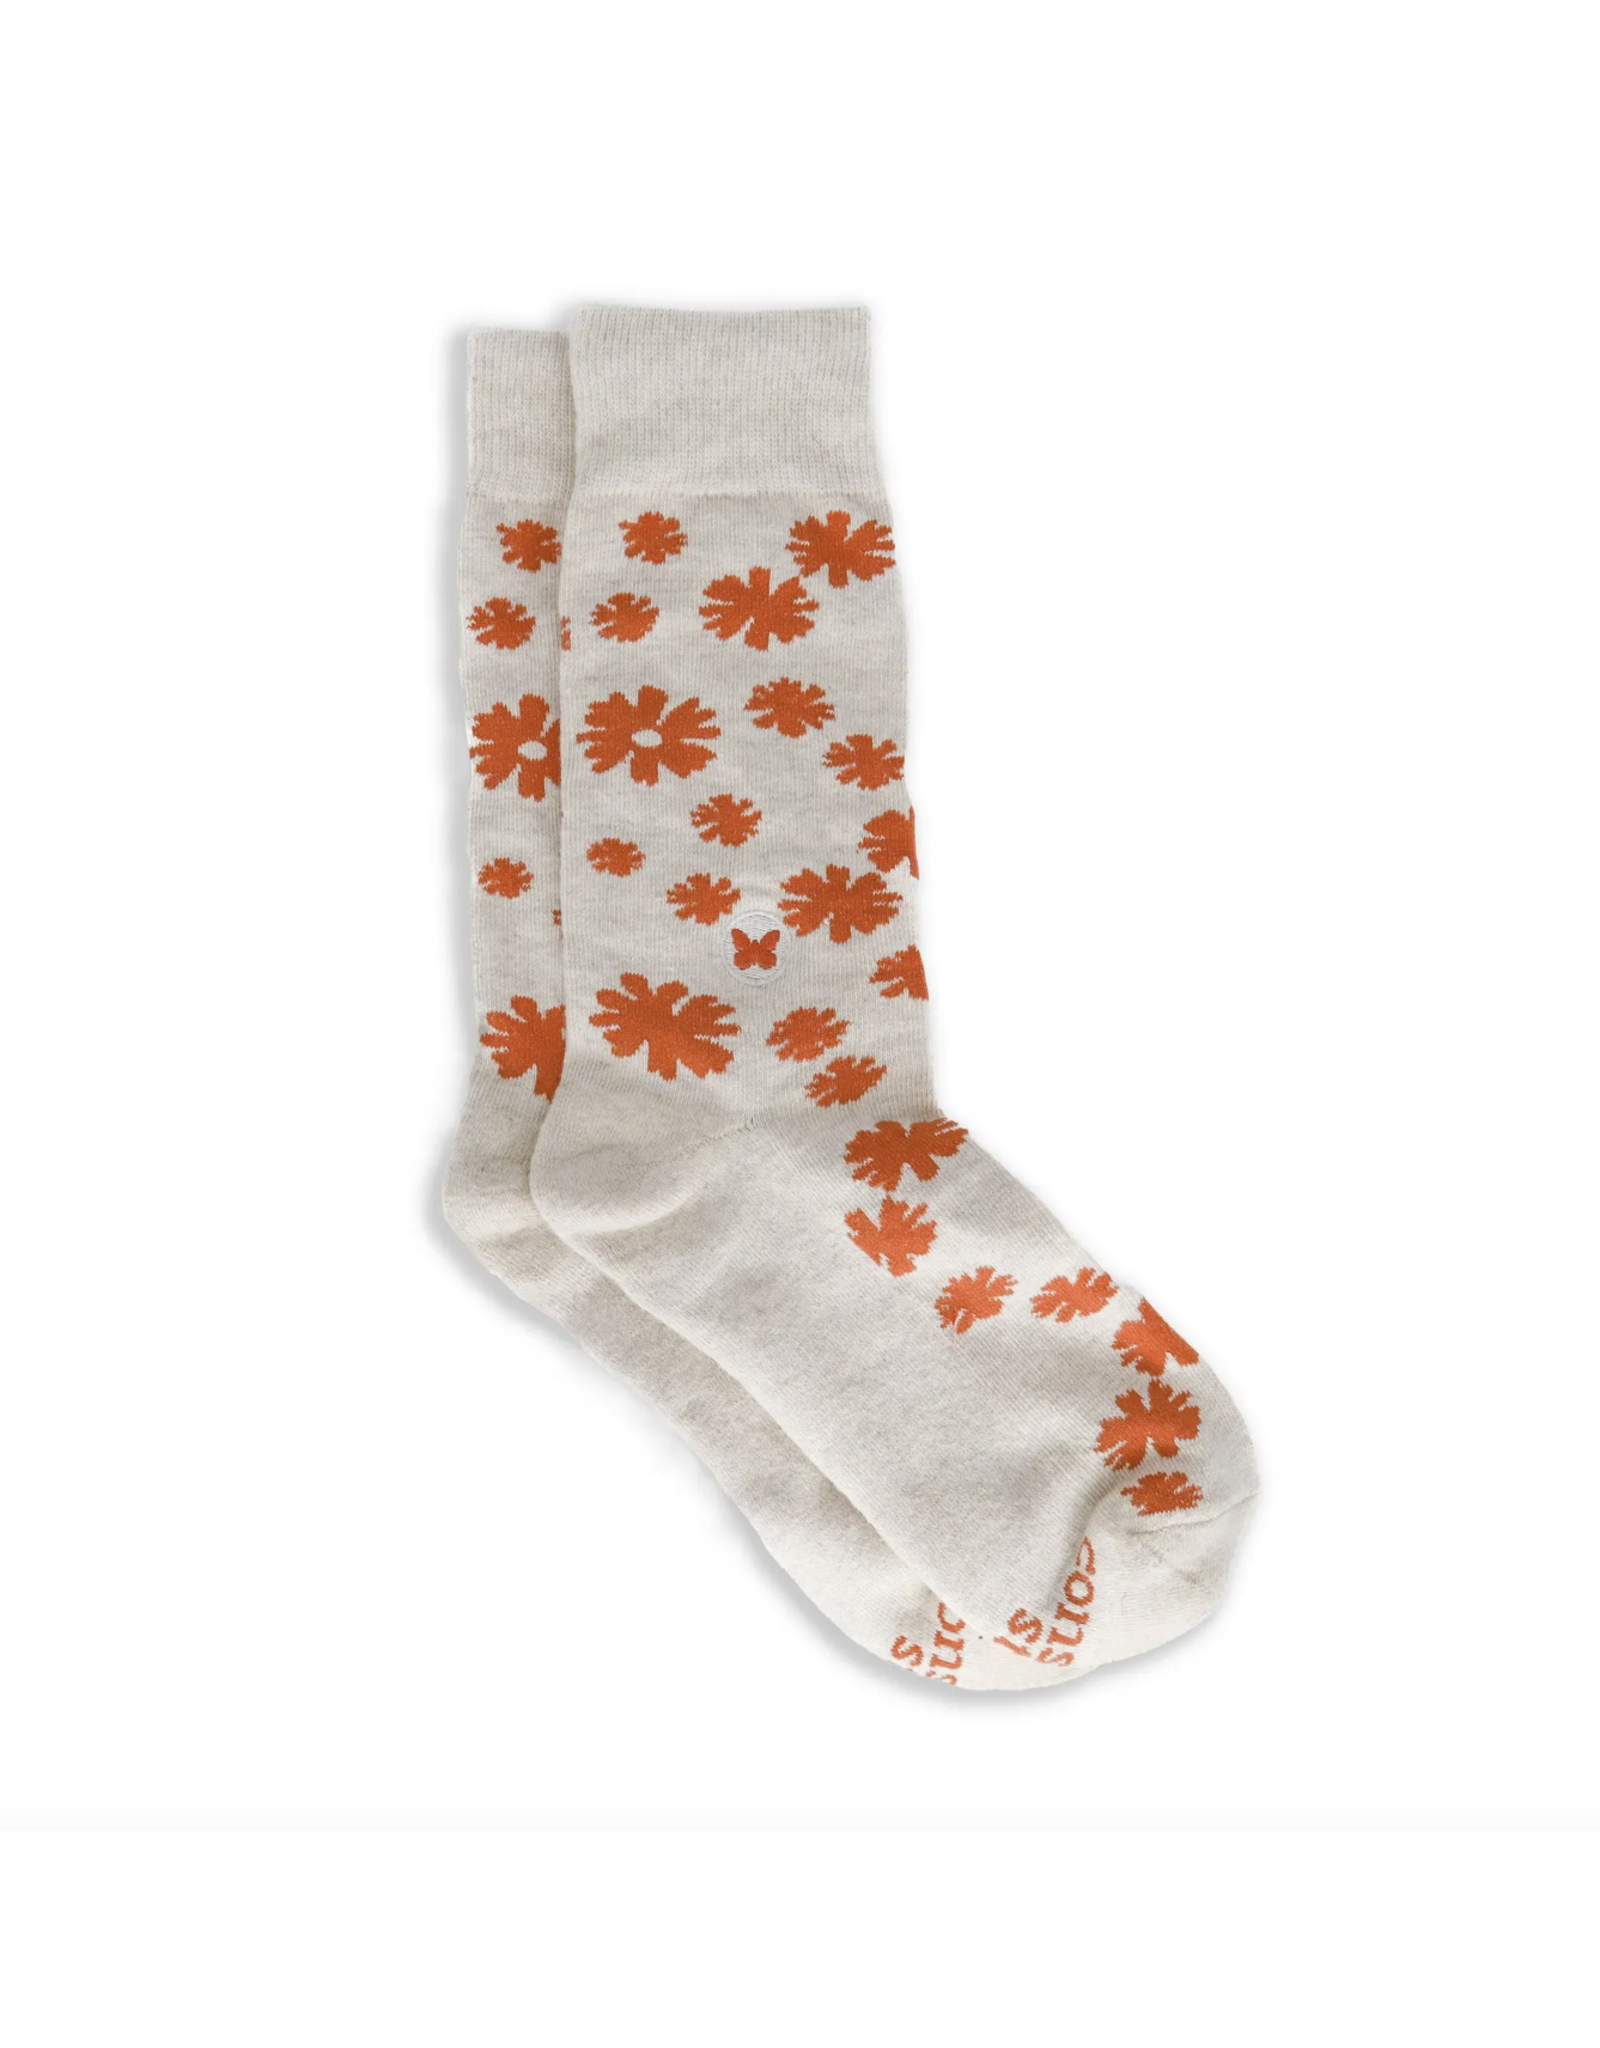 Trade roots Socks That Stop Violence Against Women, Floral